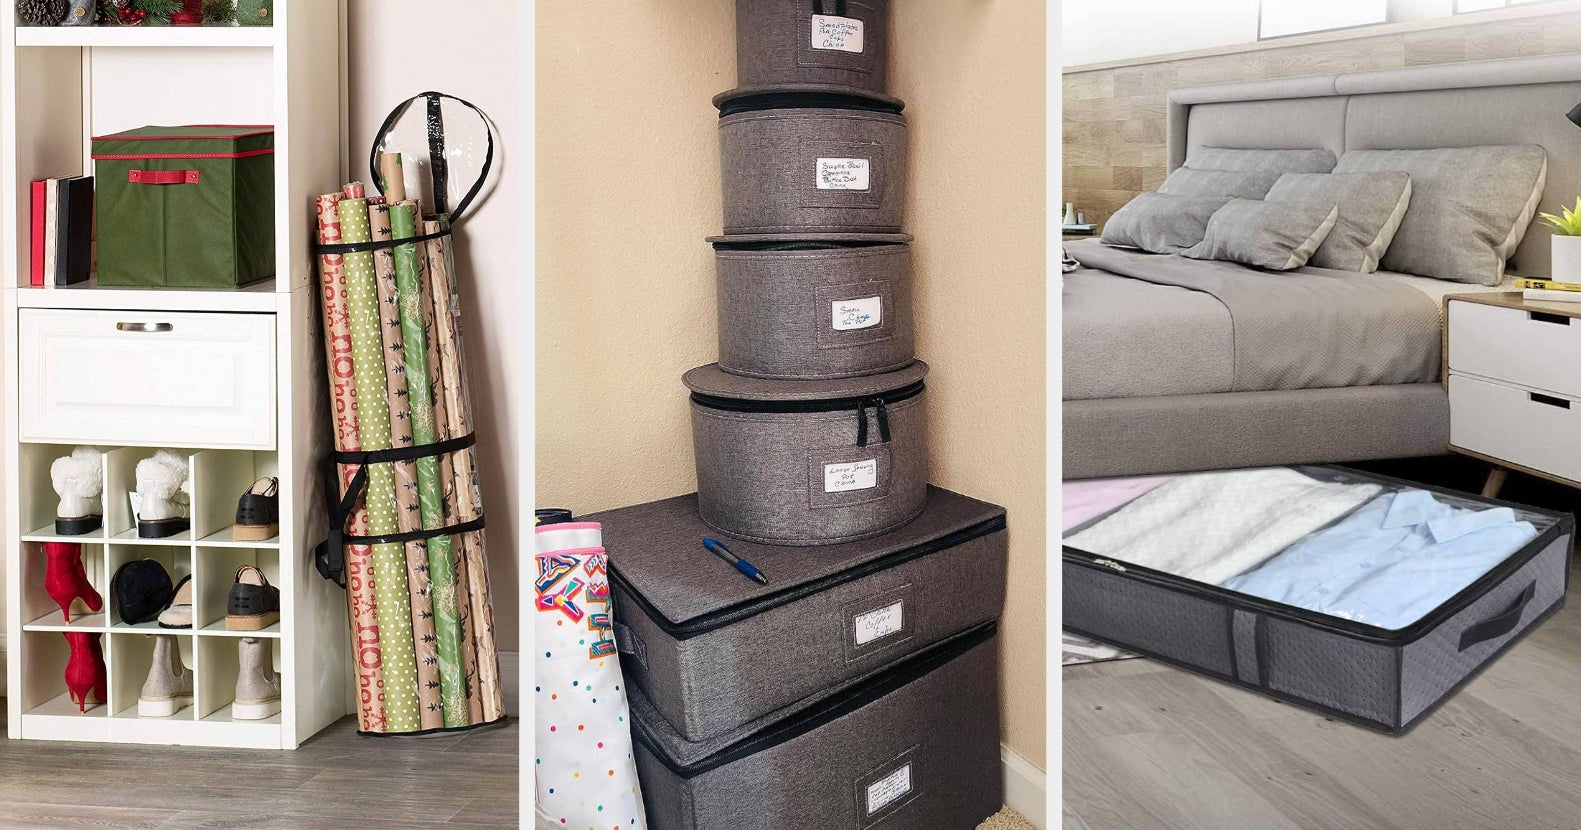 Kmart Australia shoppers go wild over a 'game changing' Christmas wrapping  paper storage box